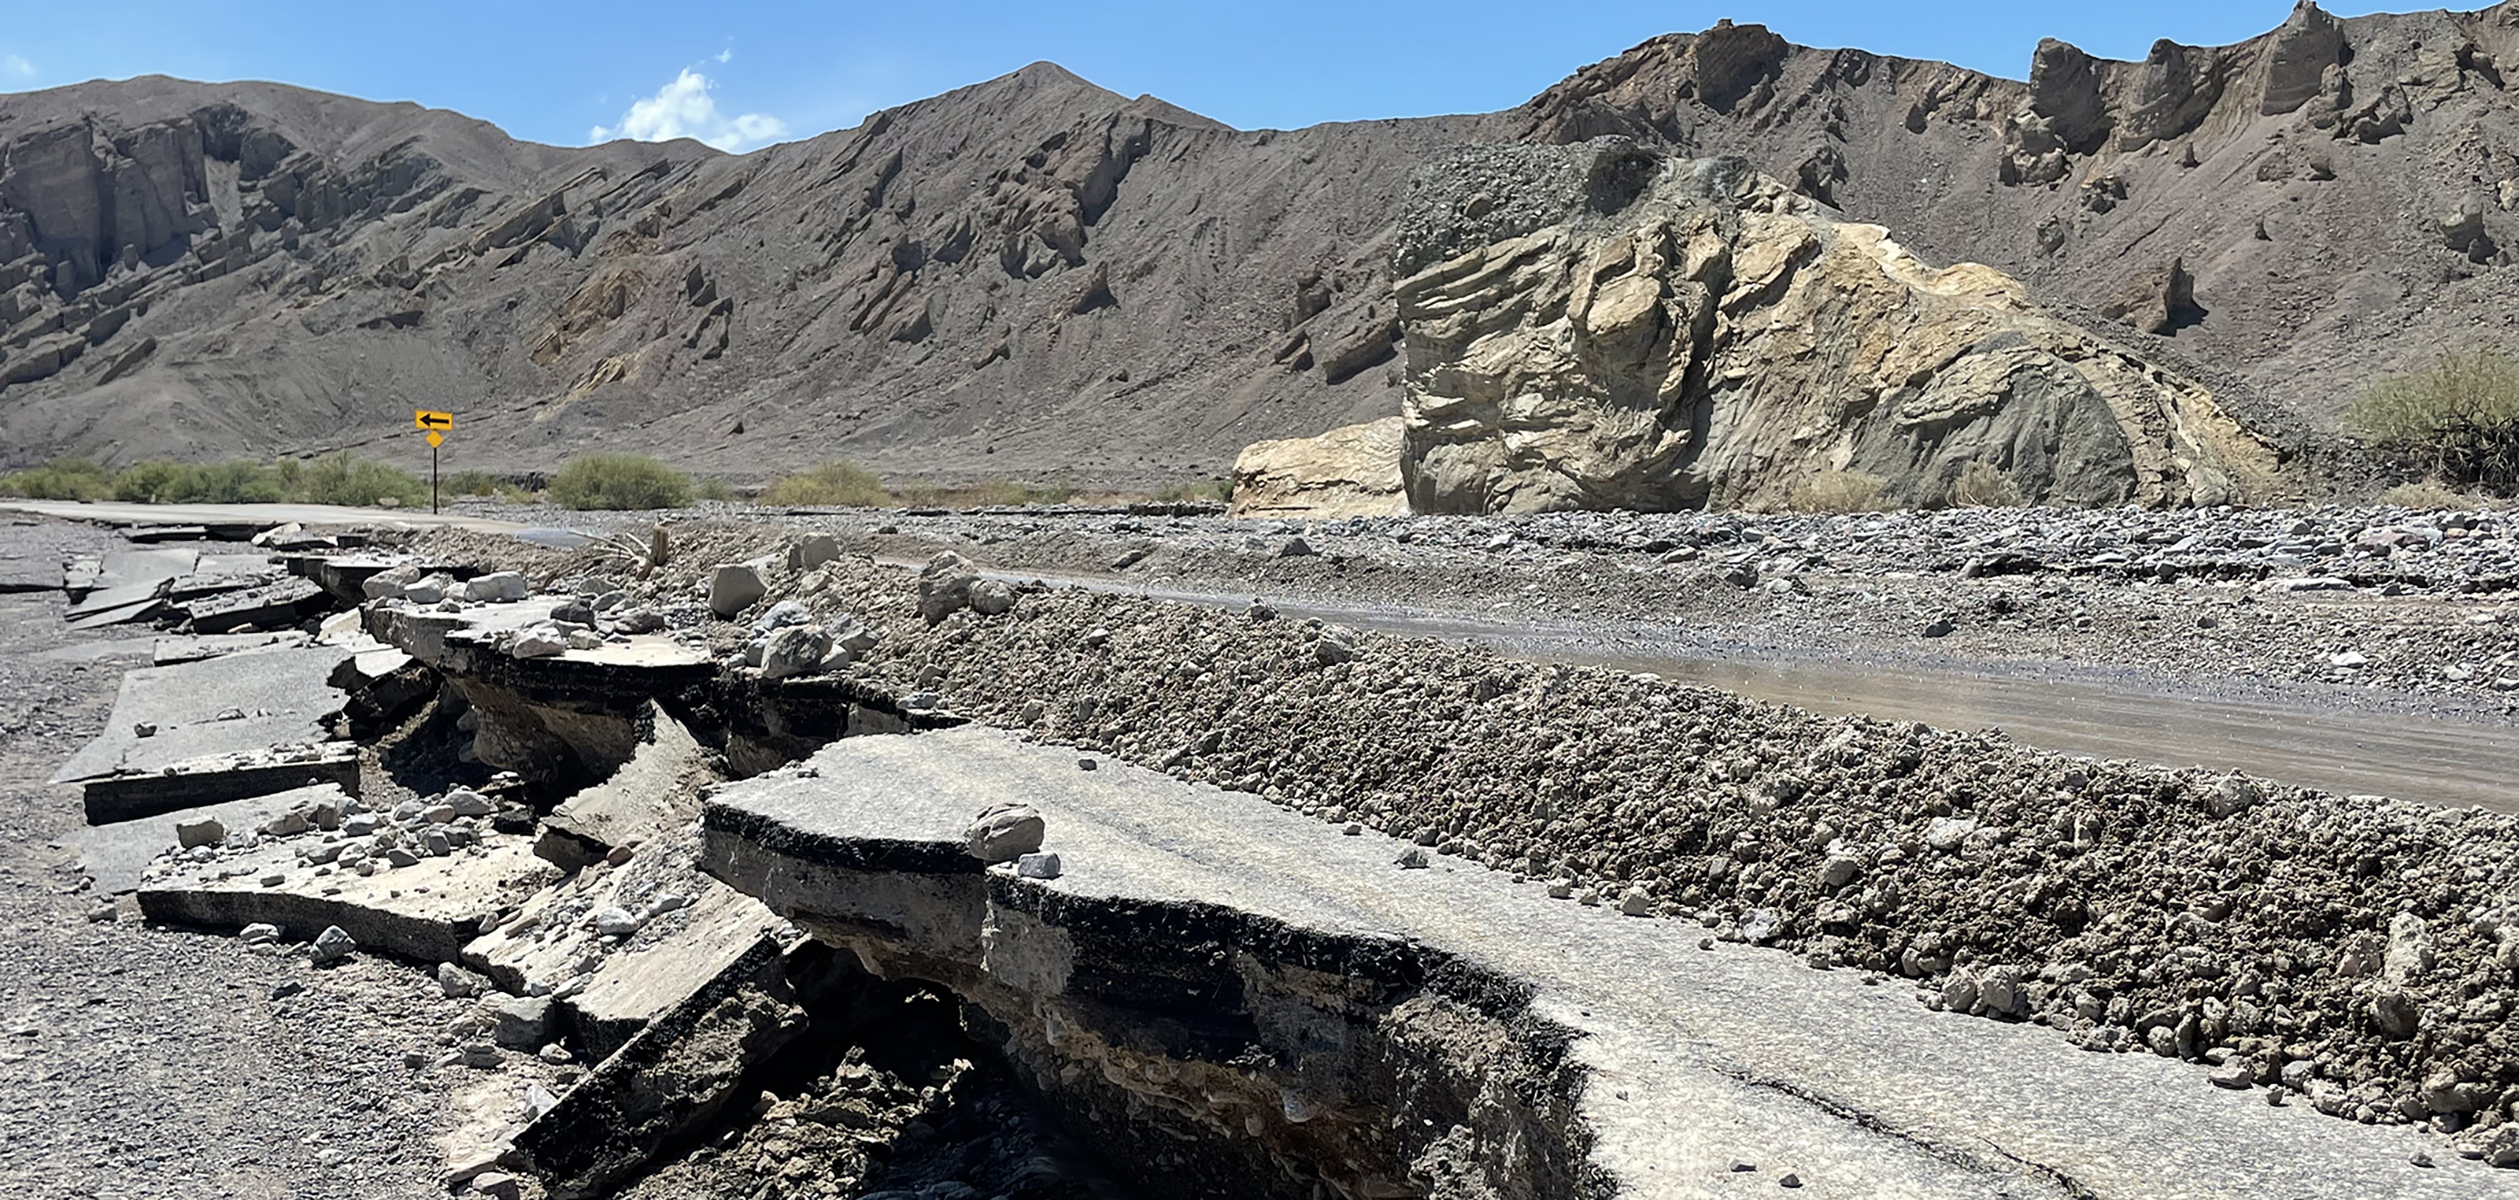 Mountain landscape frames broken pavement in the foreground of the image. The broken paved road is also covered in rocks from floods.